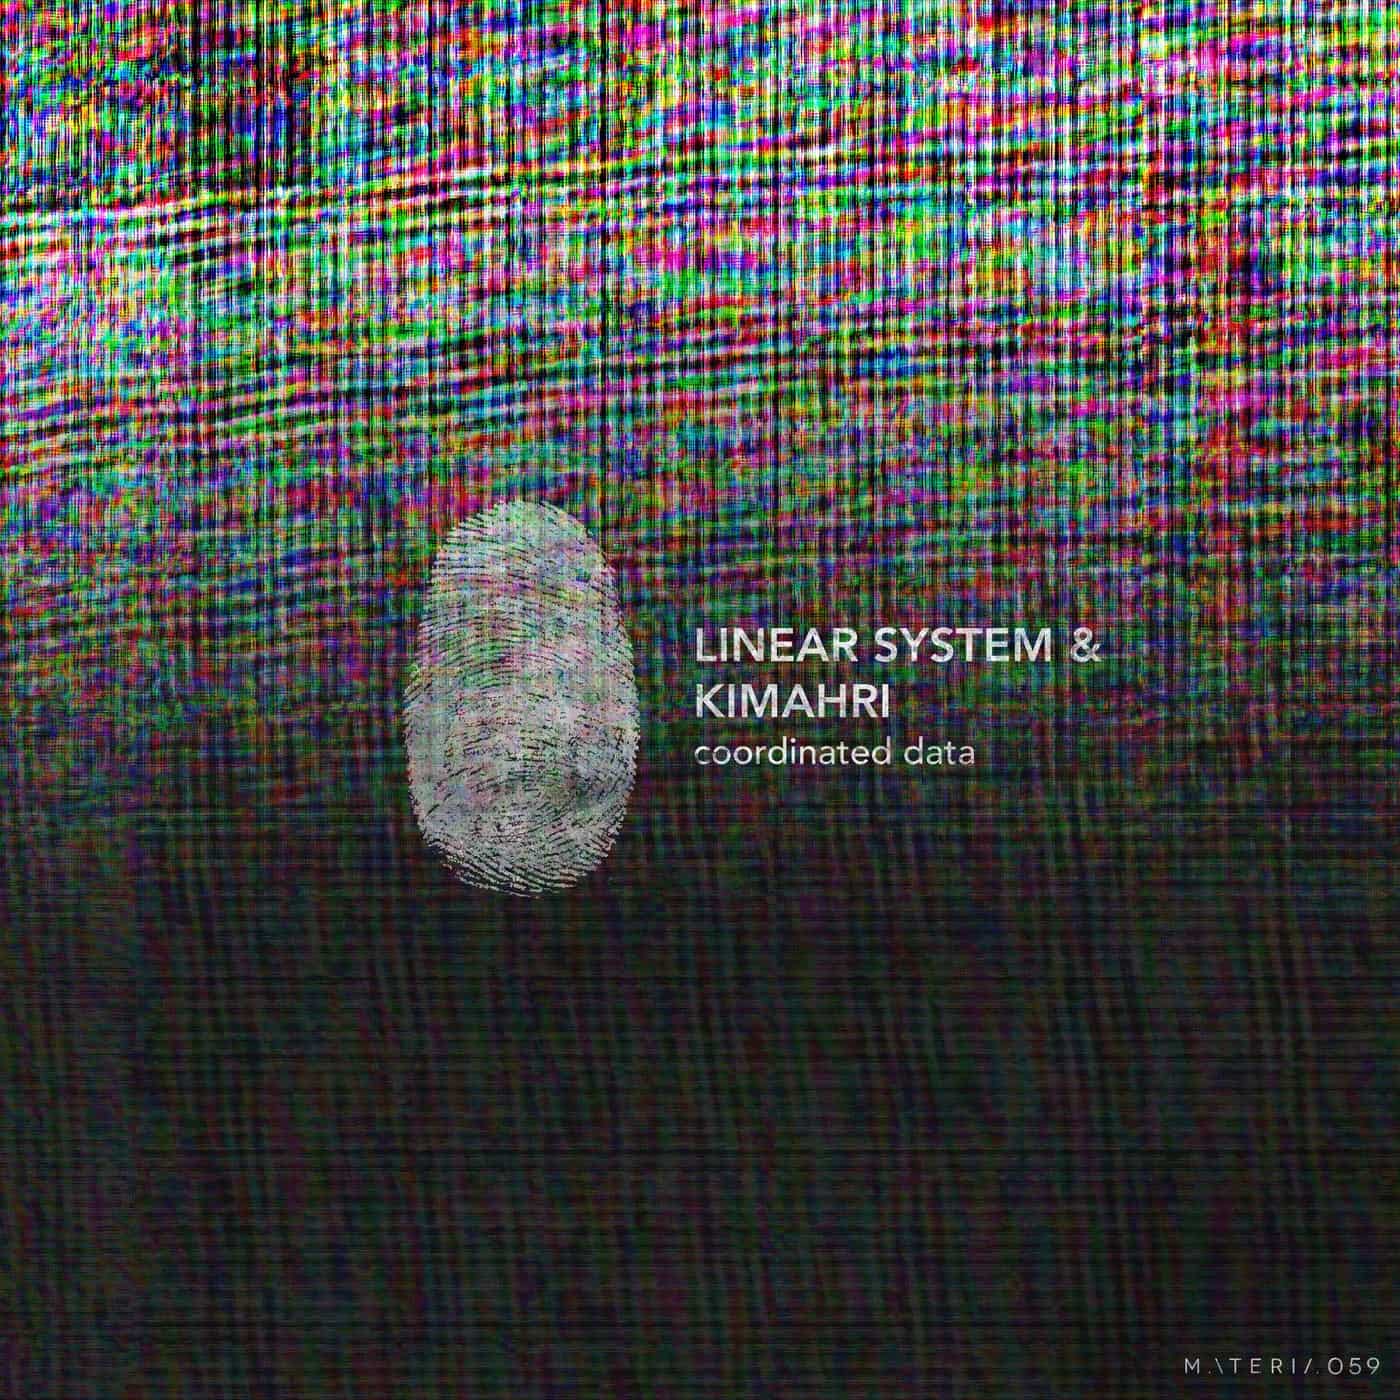 Download Linear System, Kimahri - Coordinated Data on Electrobuzz